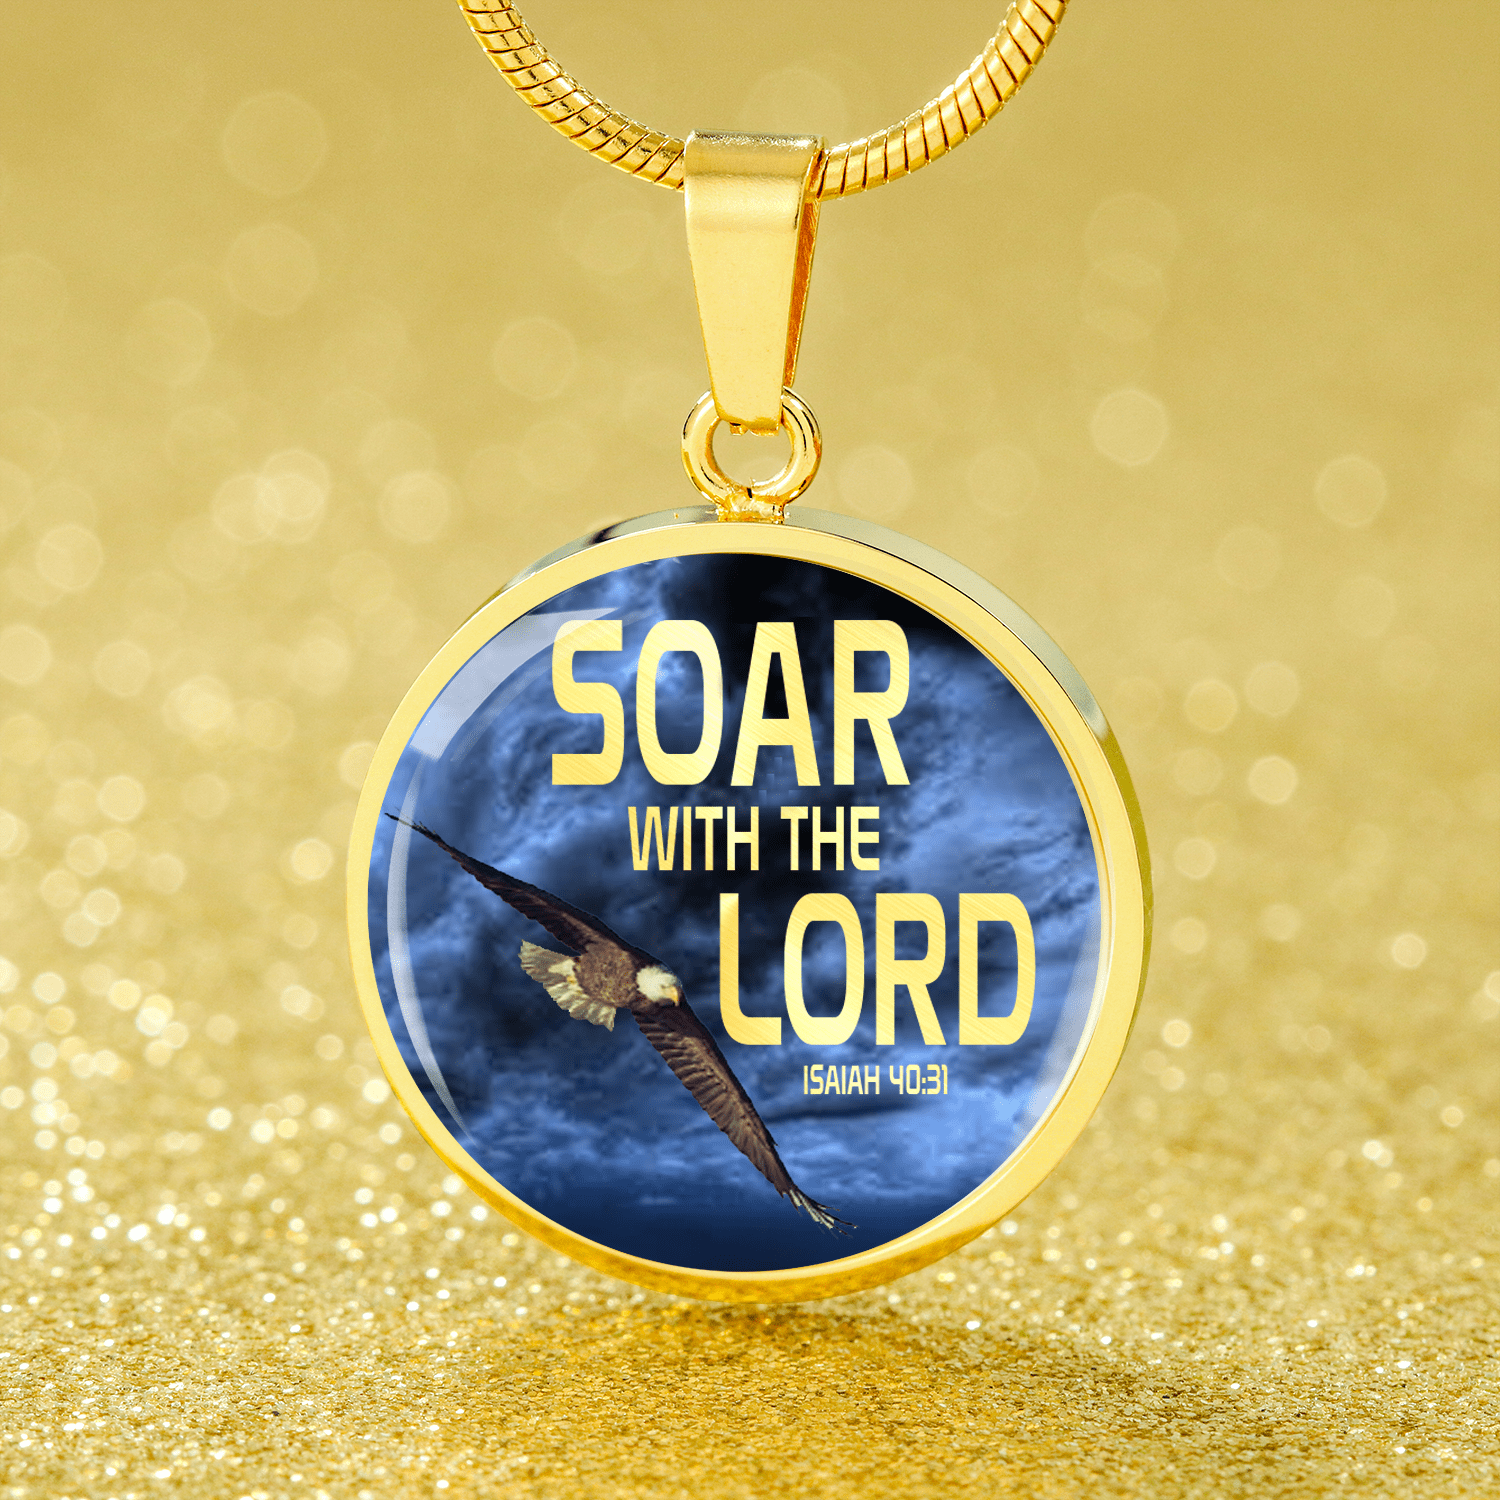 Soar Withe The Lord Isaiah 40:31 Circle Necklace Stainless Steel or 18k Gold 18-22" - Express Your Love Gifts